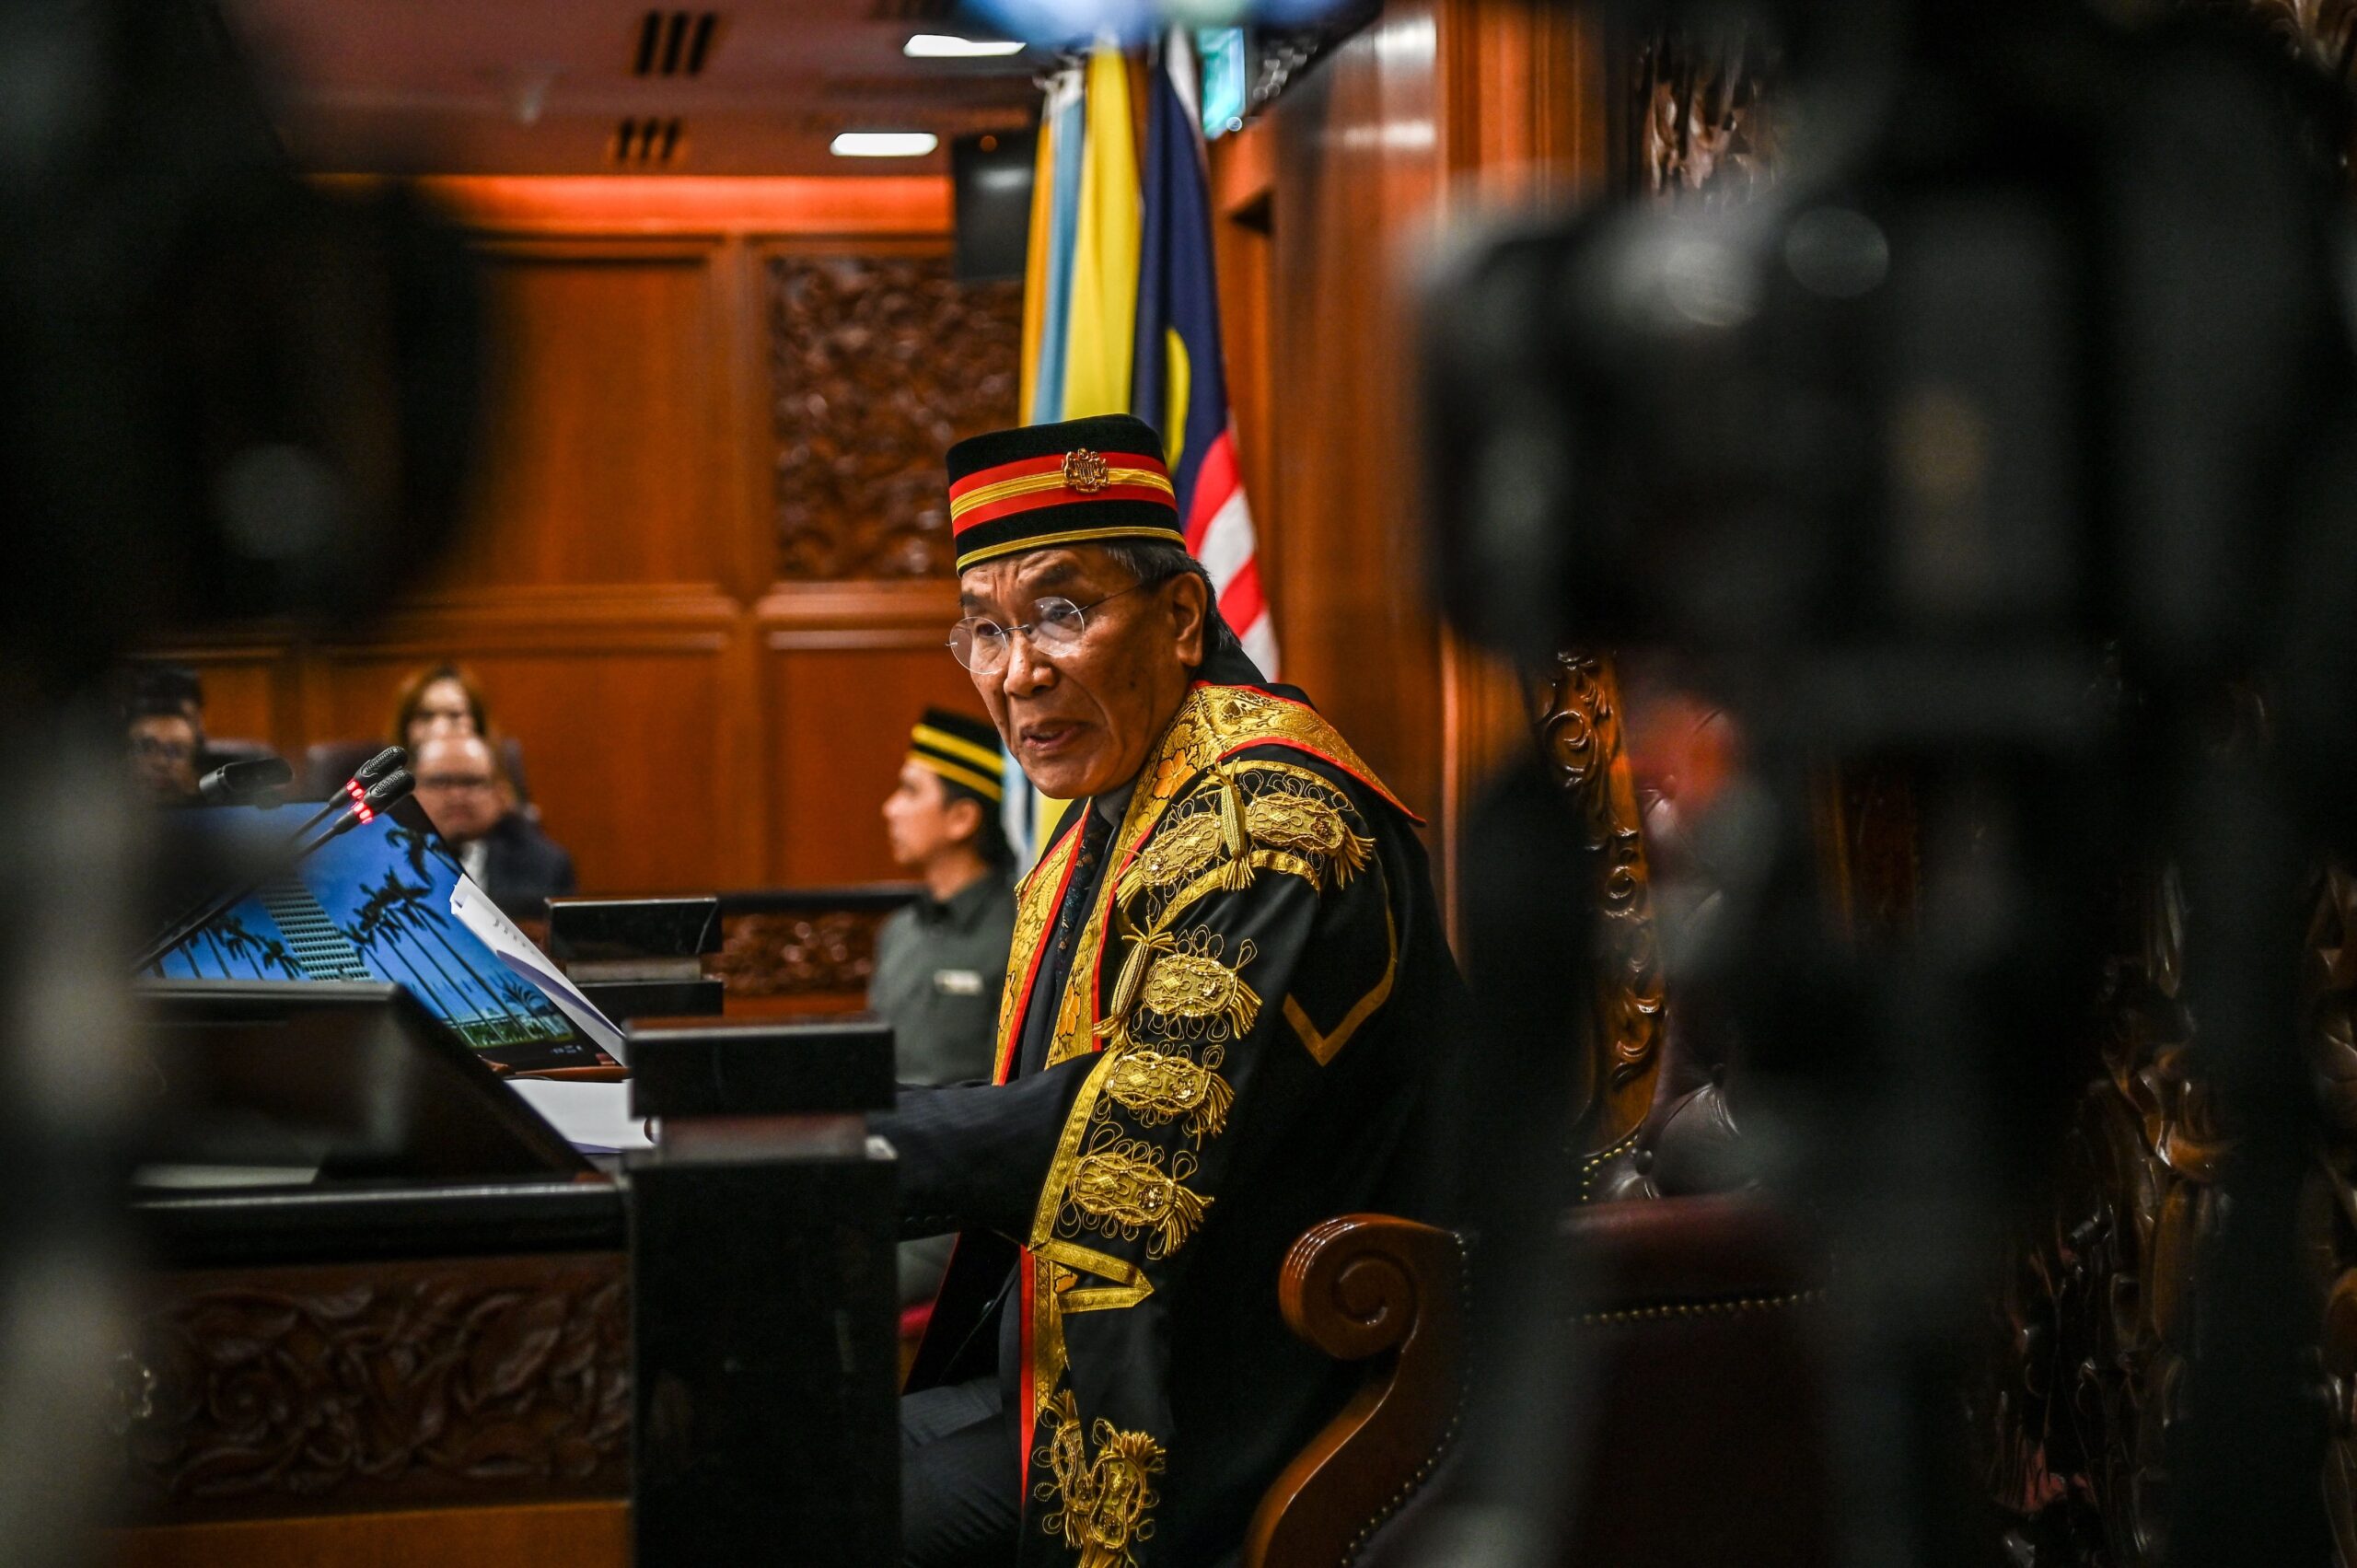 Debate substantively even when at odds with Dewan Rakyat, Senate told by new president